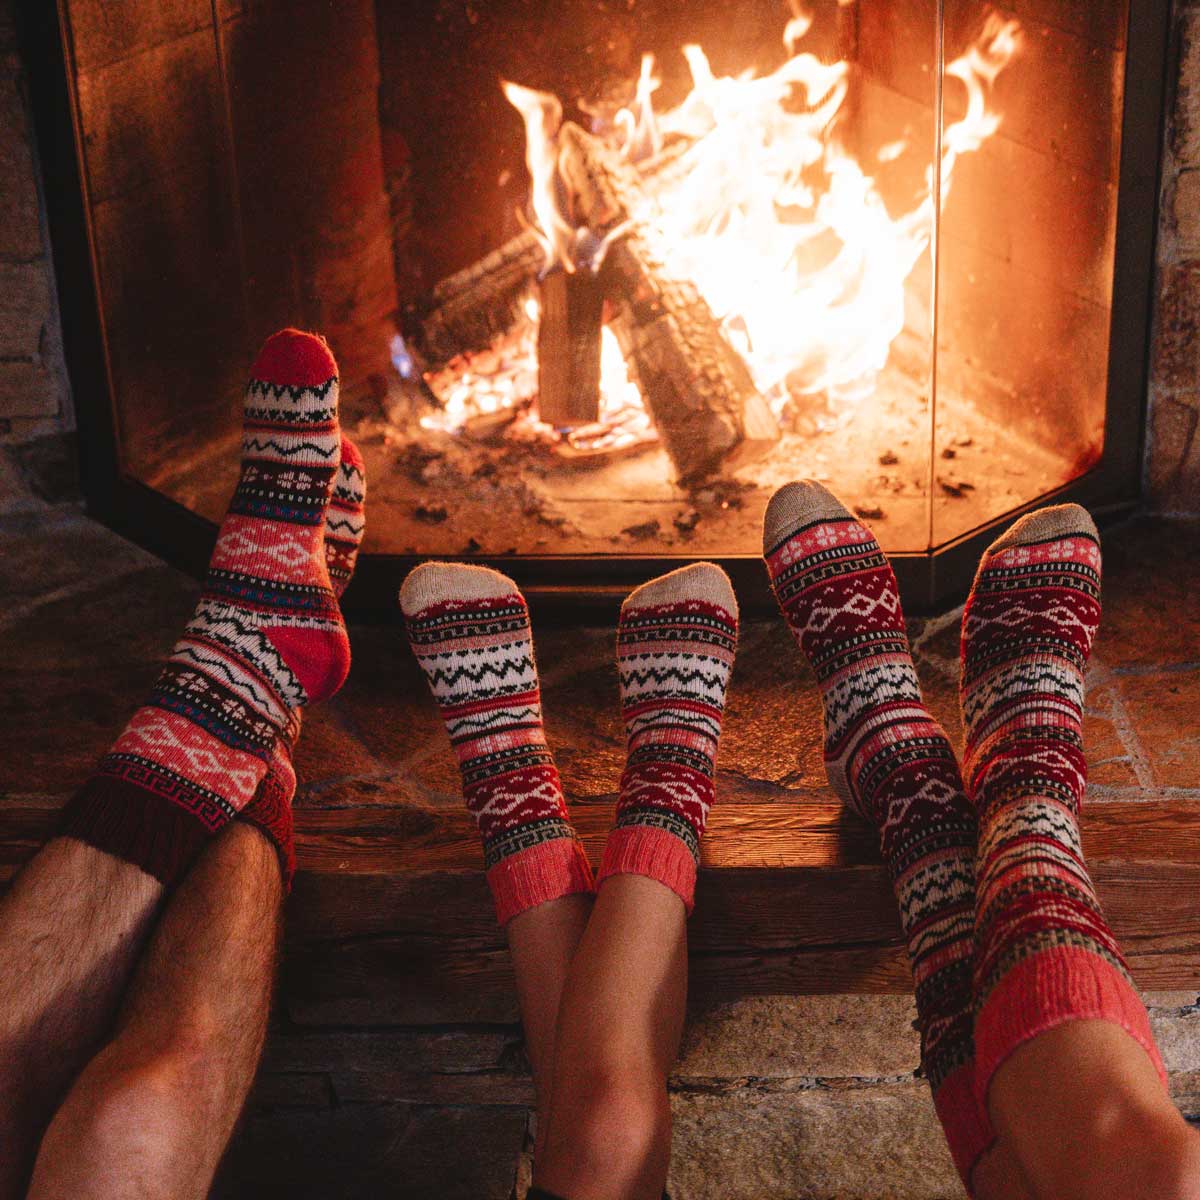 Nordic Socks at fire place 